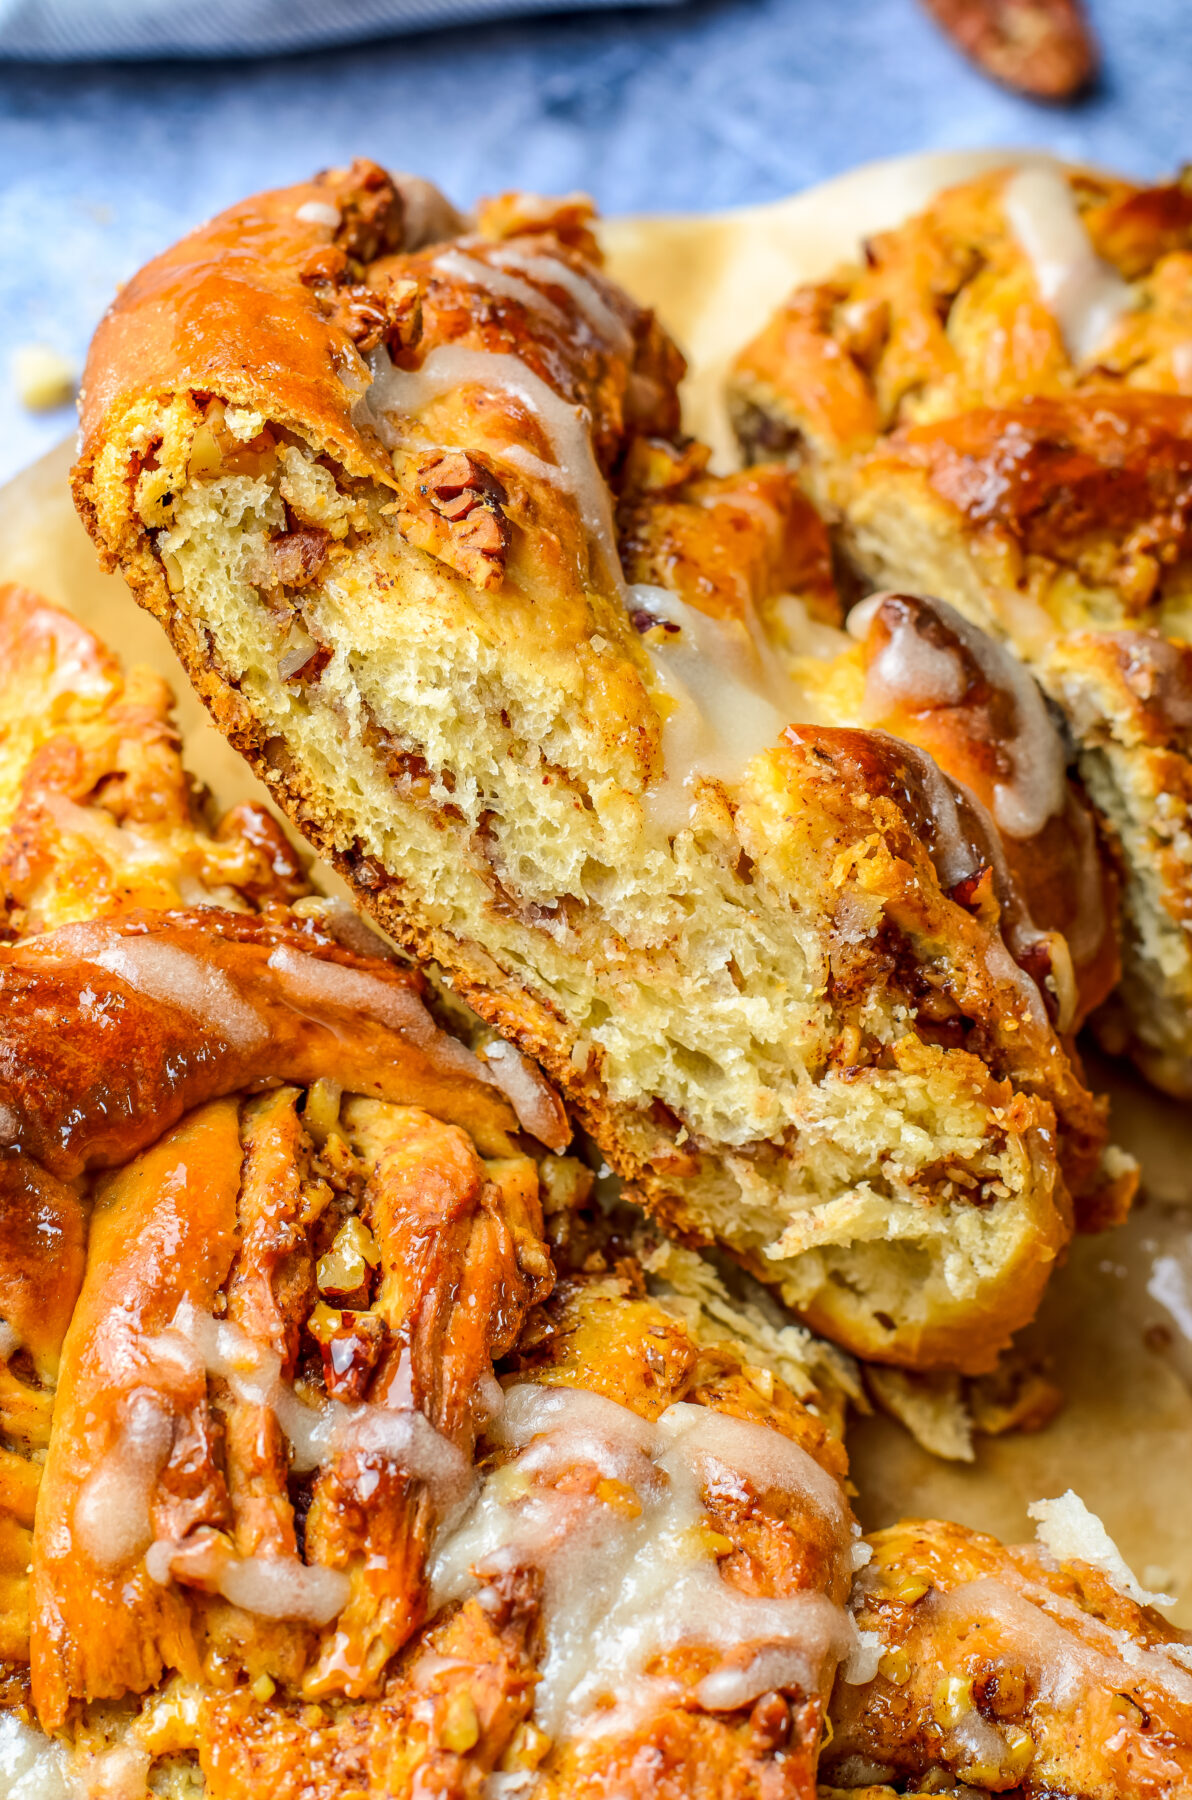 This Maple Pecan Wreath Bread is made up of soft and fluffy yeast dough with a cinnamon pecan filling, all topped with a sweet maple glaze.